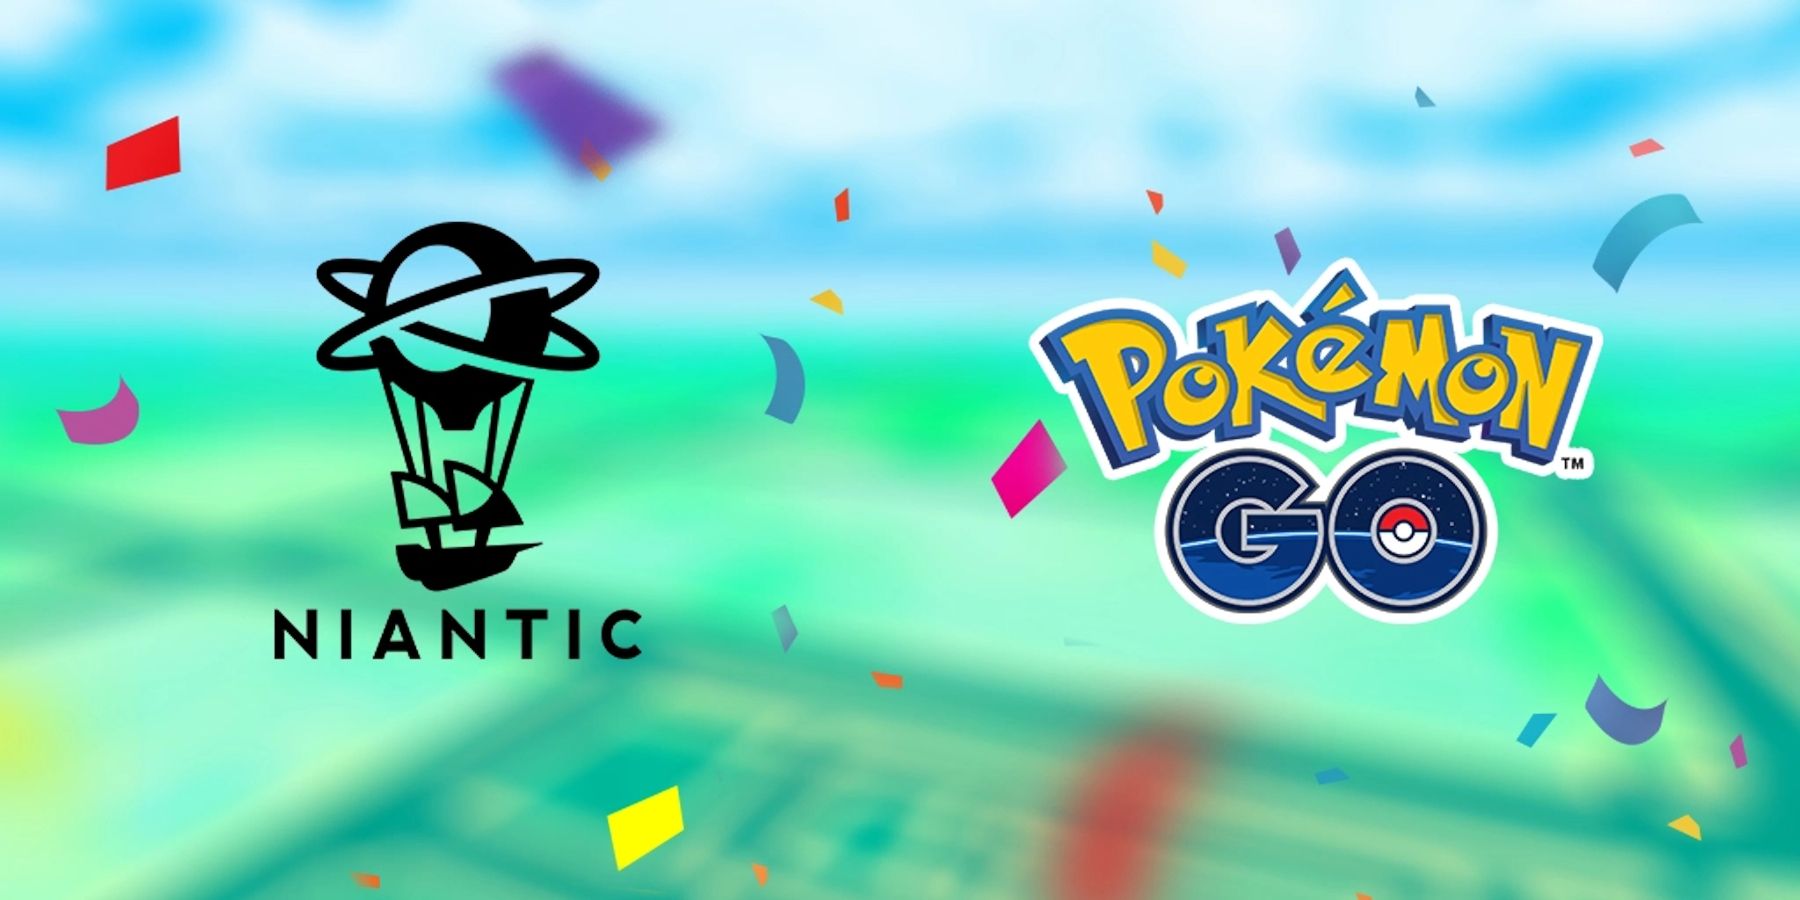 pokemon go gyms and pokestop changes